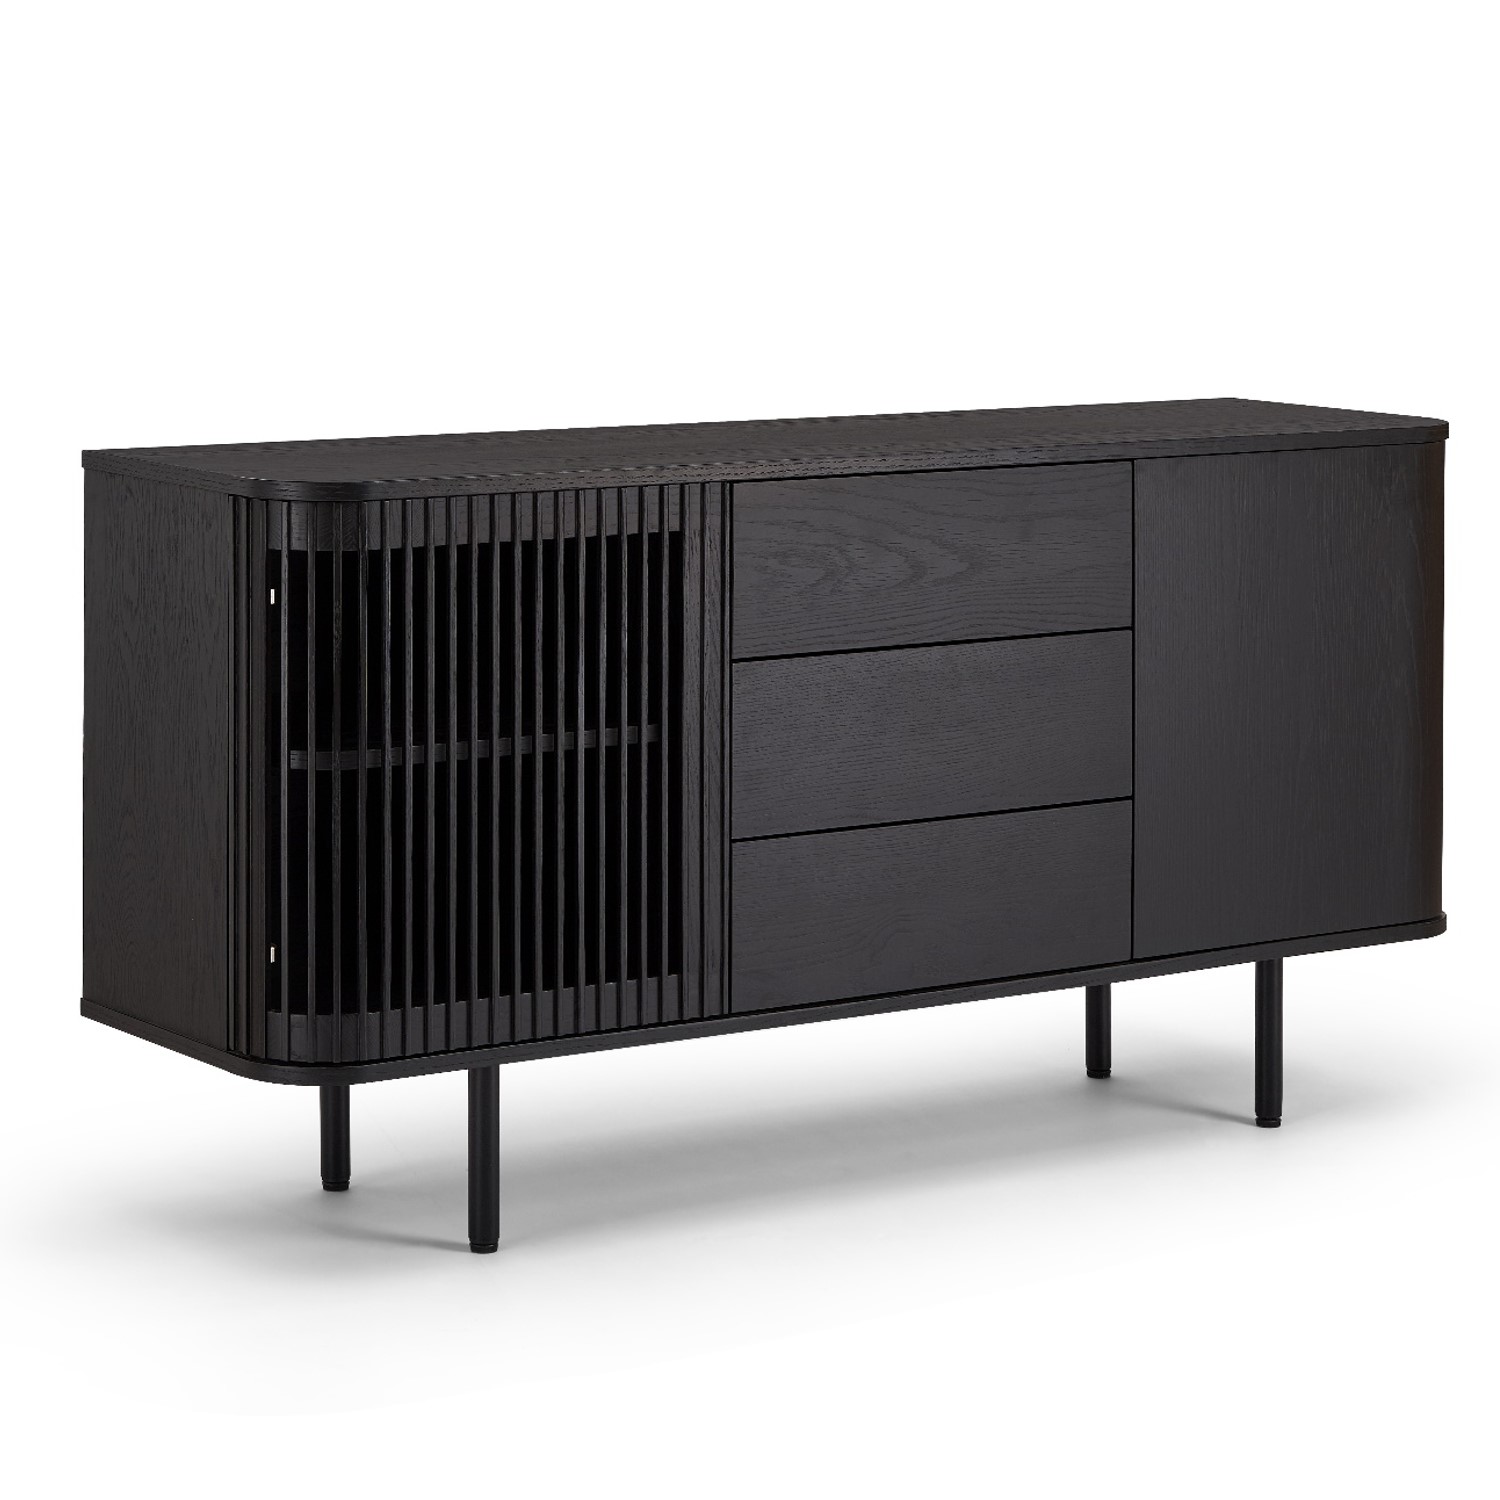 Photo of Large black wooden sideboard with drawers - jarel